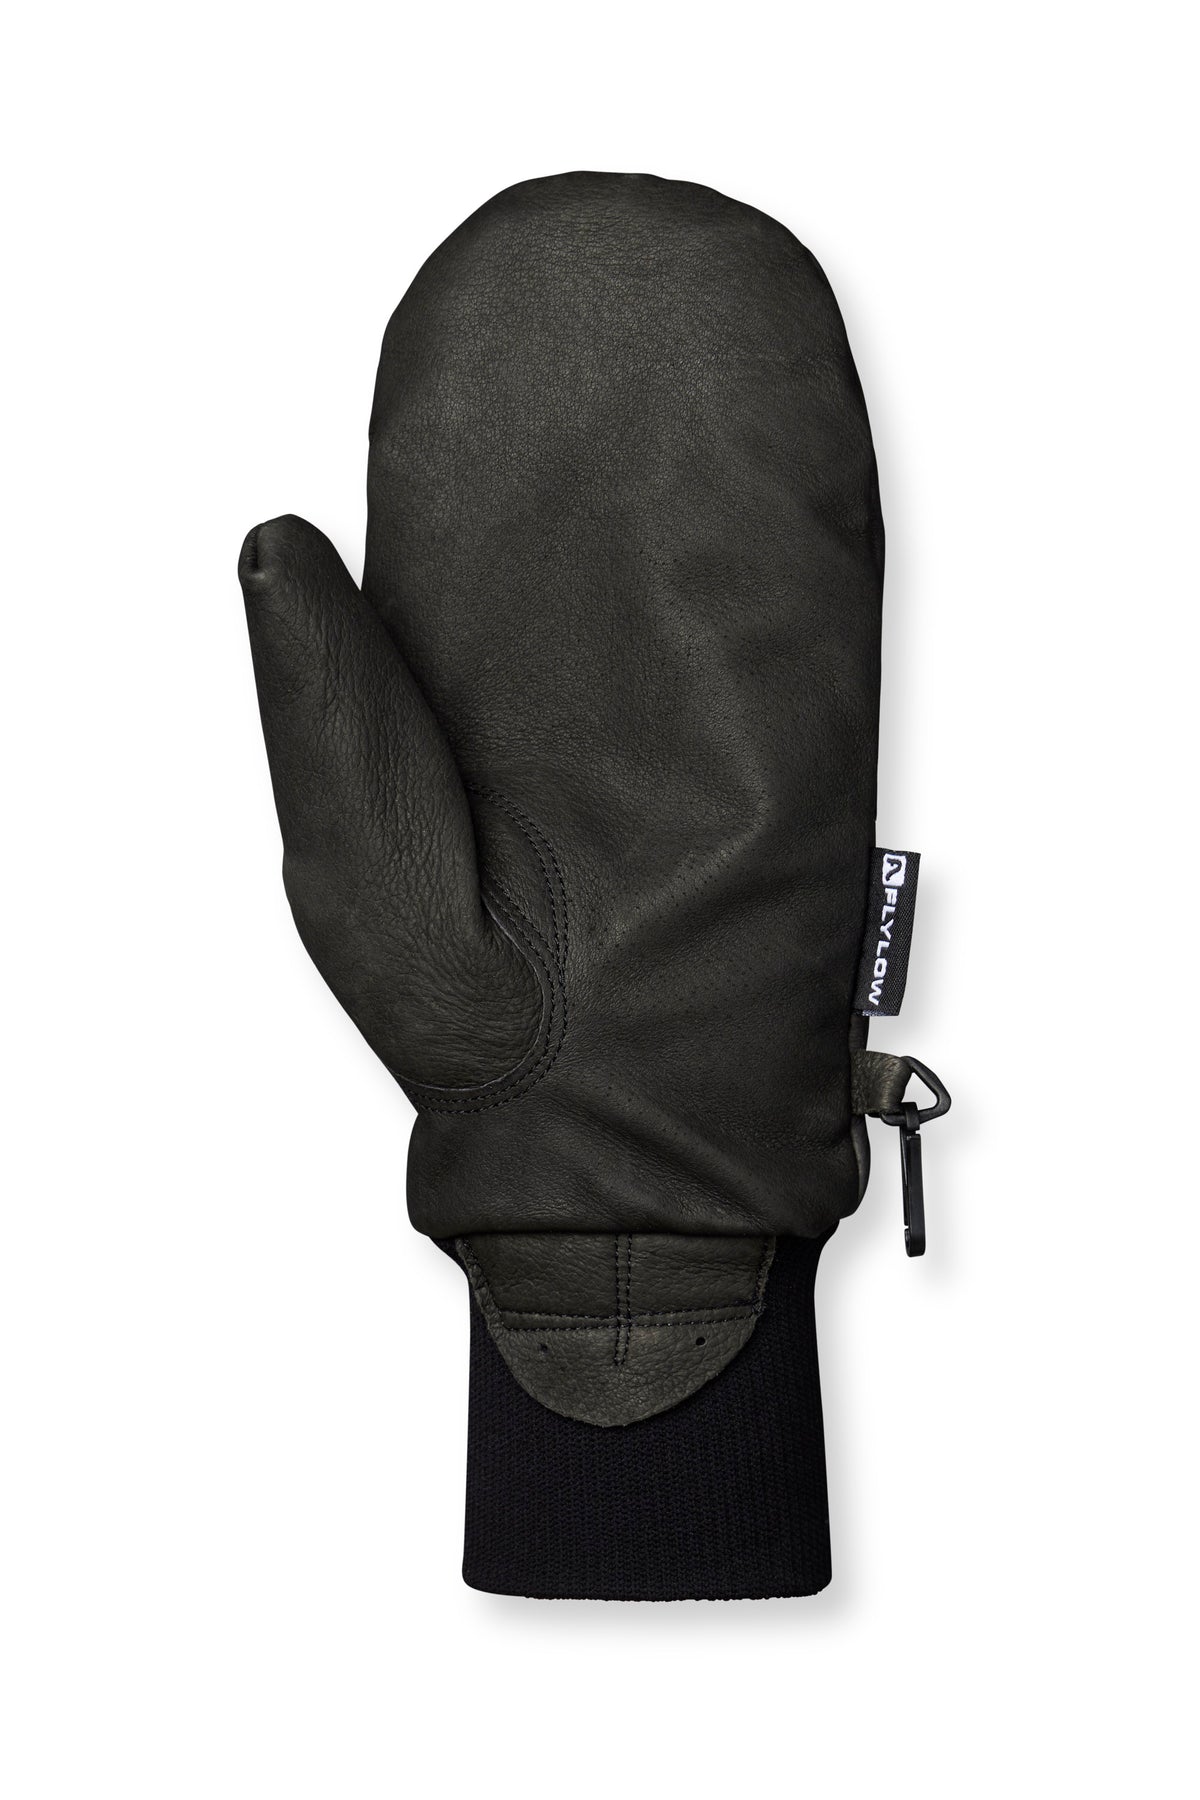 Flylow Oven Mitts Review - Mountain Weekly News